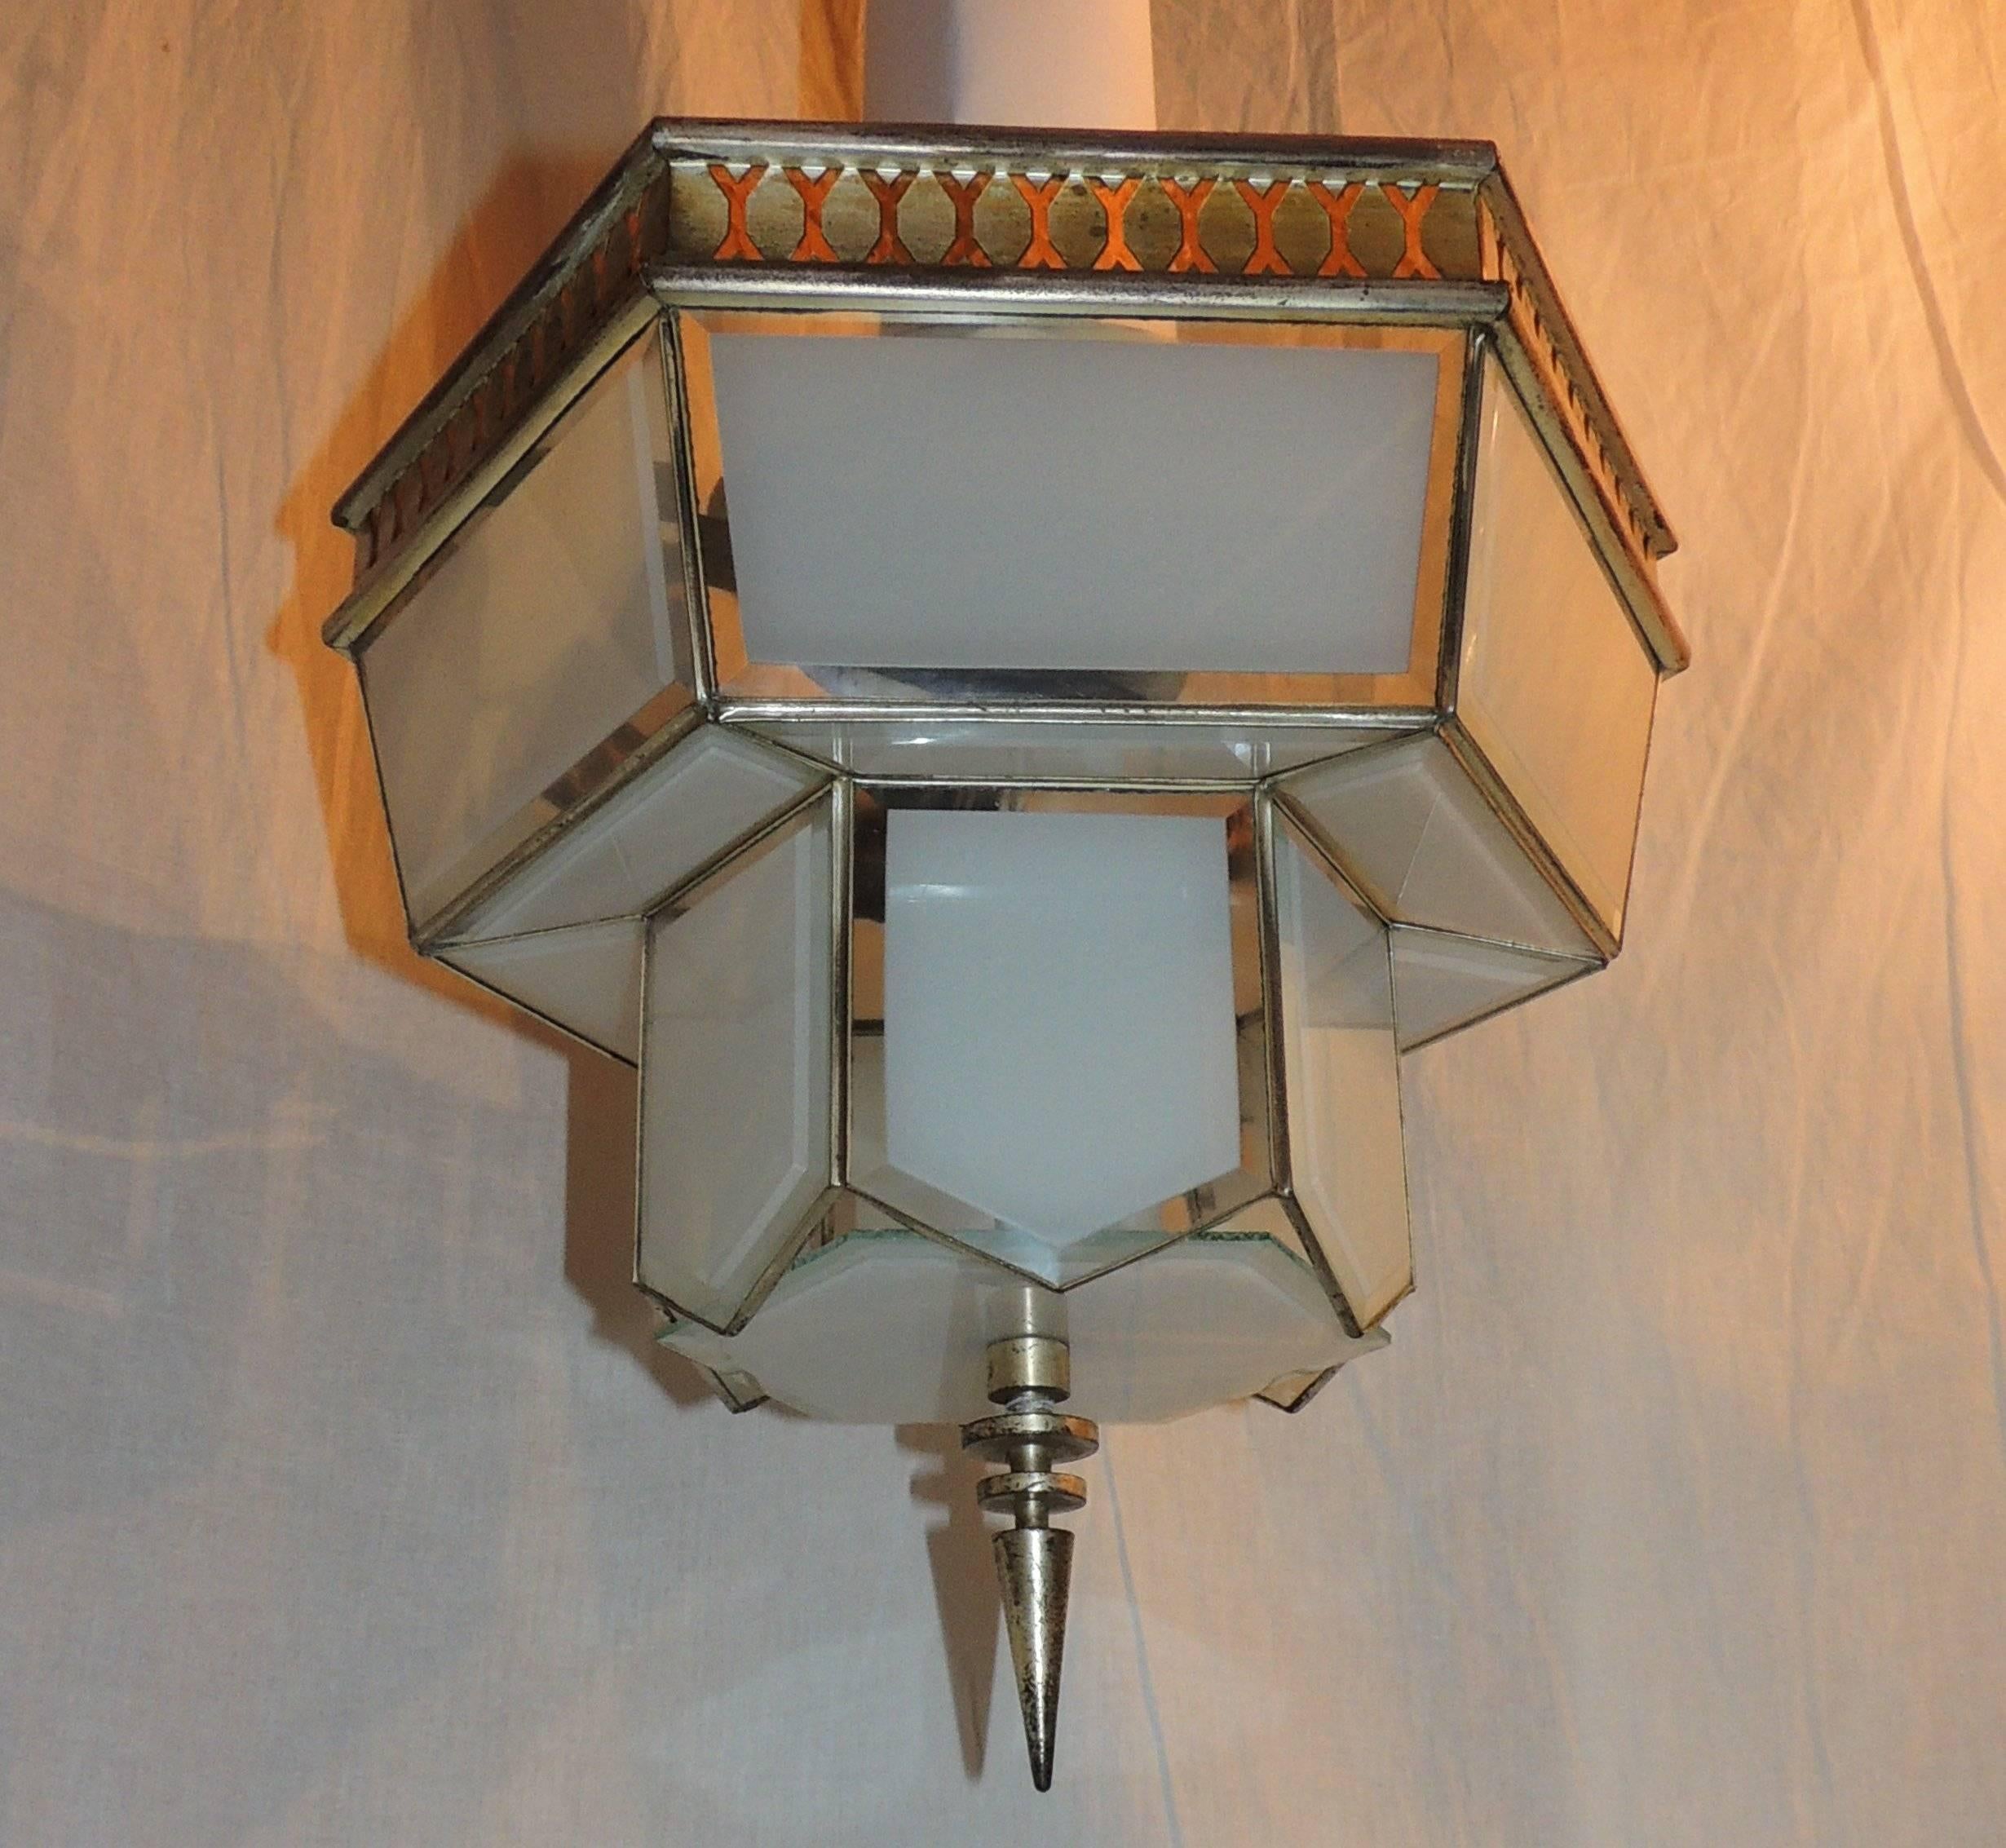 Wonderful Art Deco two-light fixture with beveled clear to frosted glass panels and original trim surrounding the top flush mount fixture.

Measures: 14